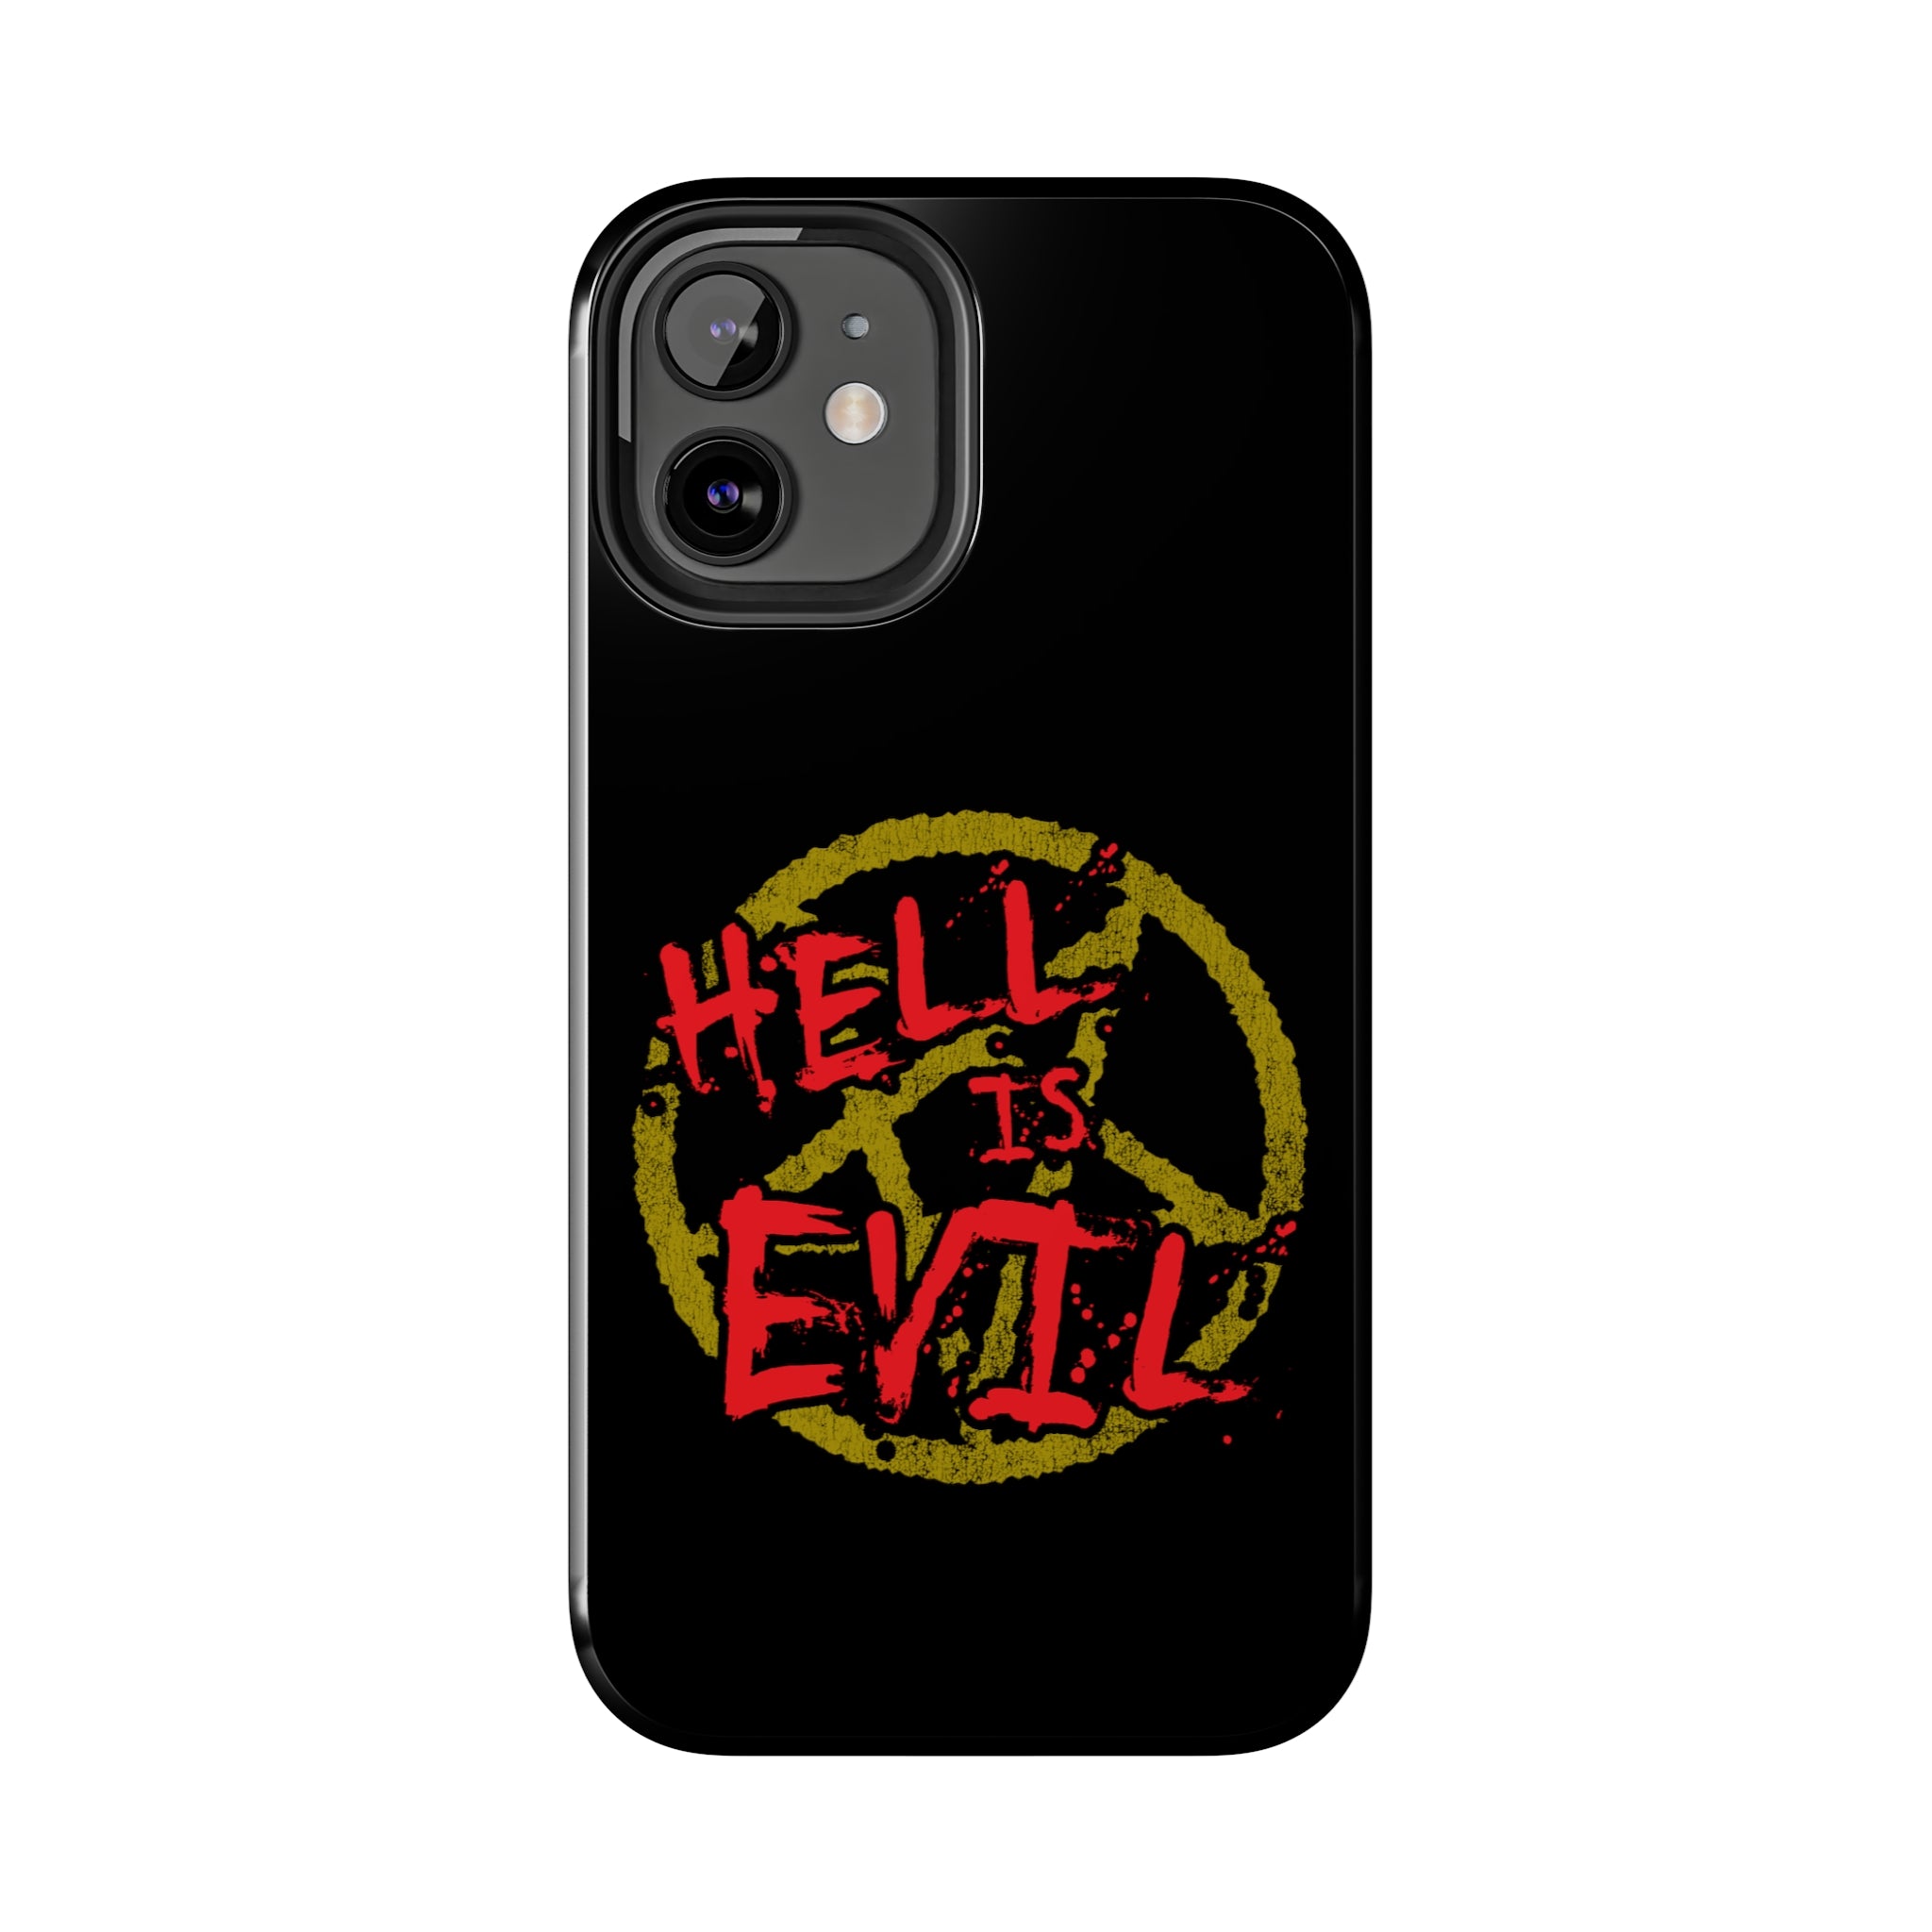 HELL IS EVIL Tough Phone Cases